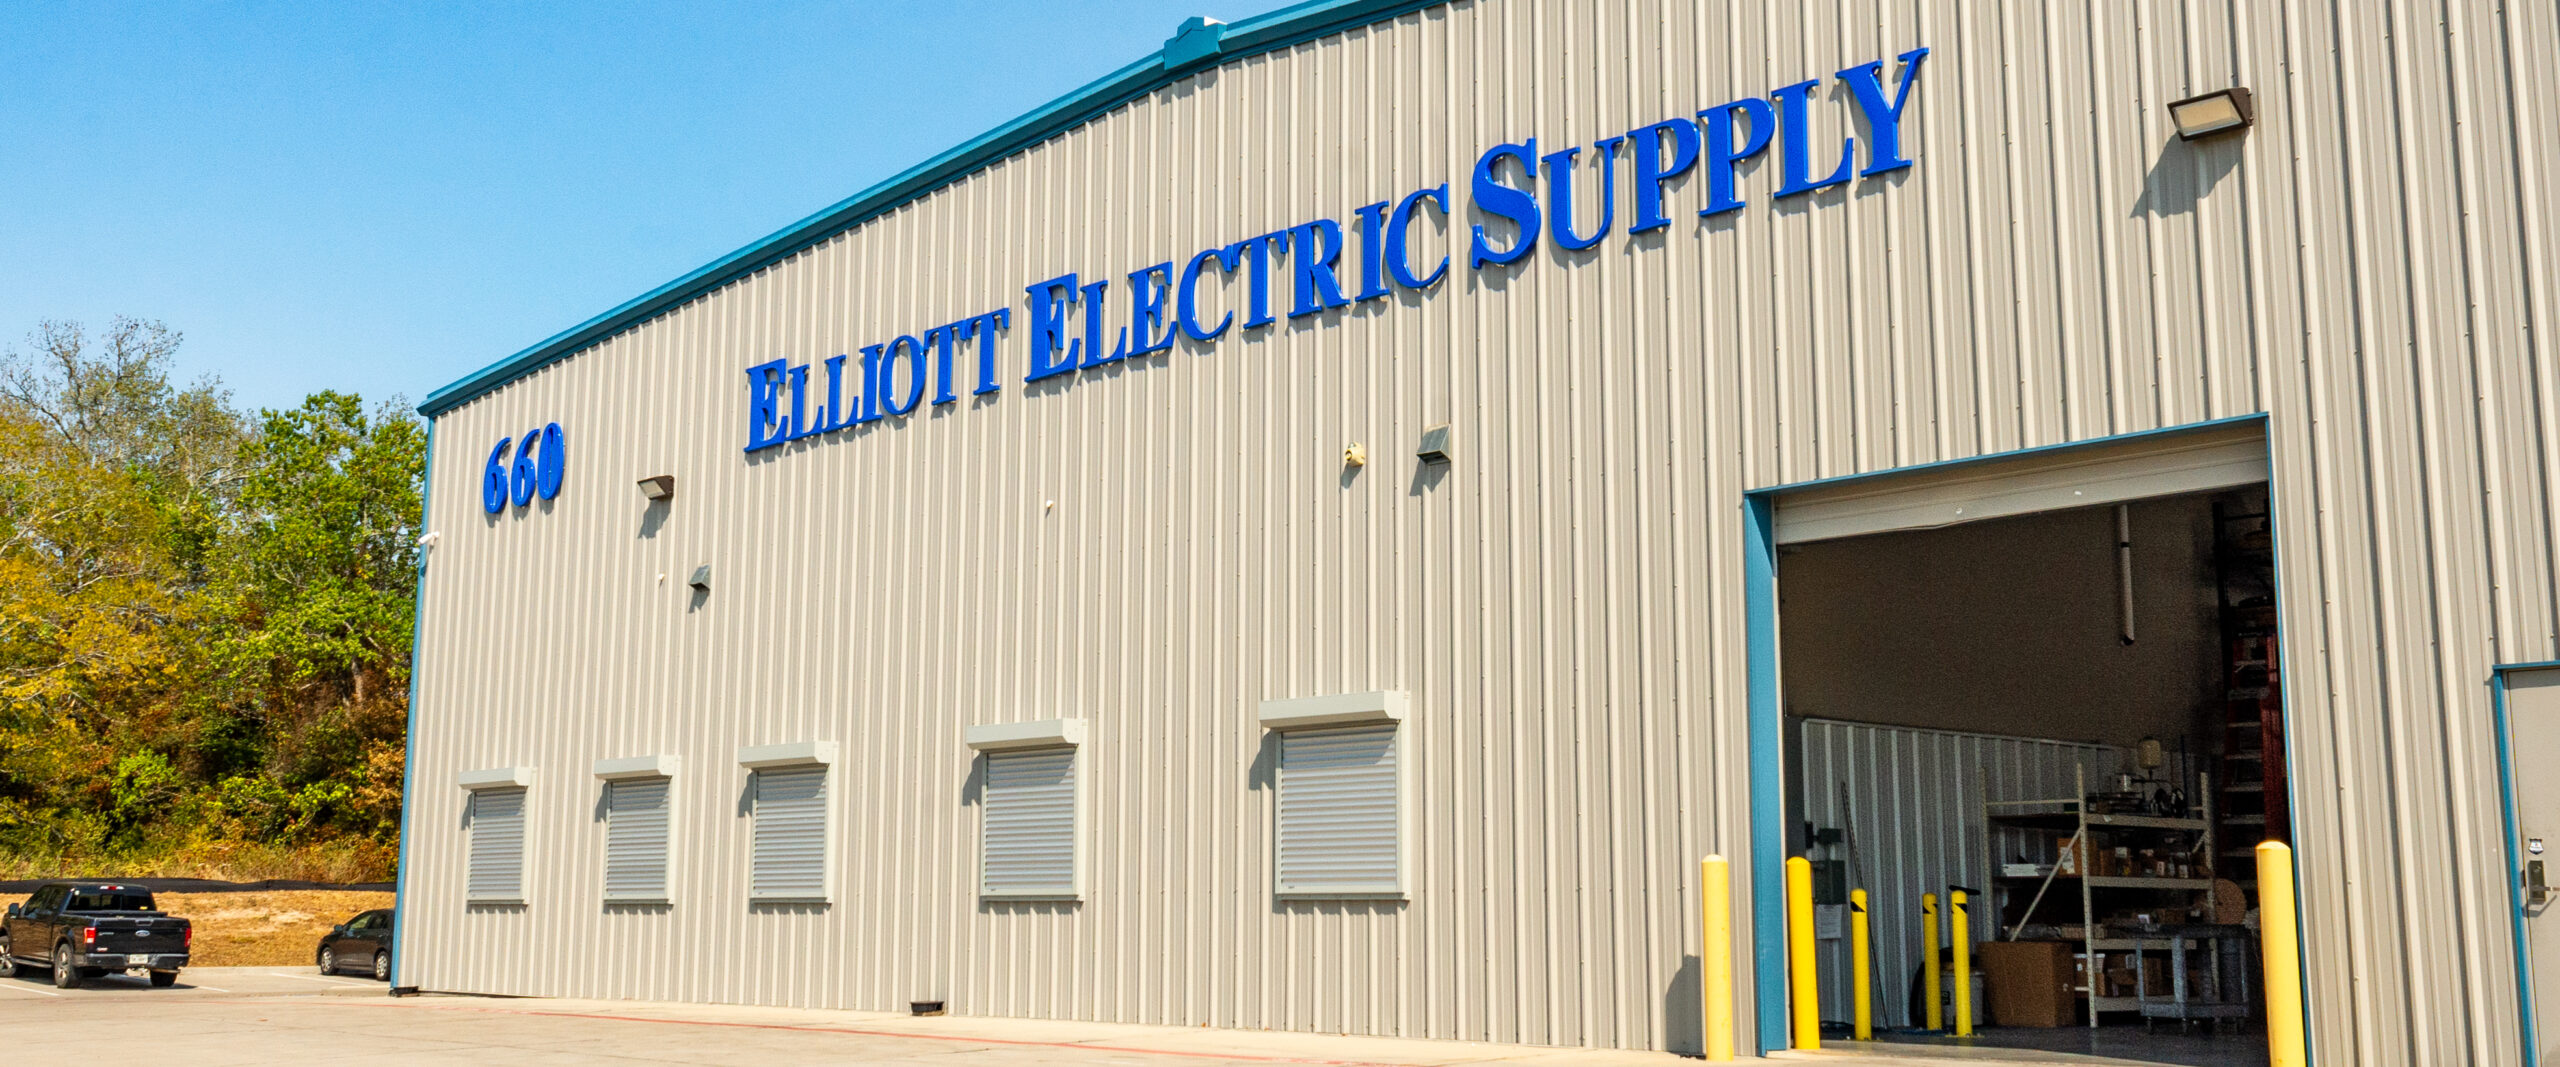 Exterior View of Elliott Electric Supply Company with Roller Shutters Installed at the Entrance